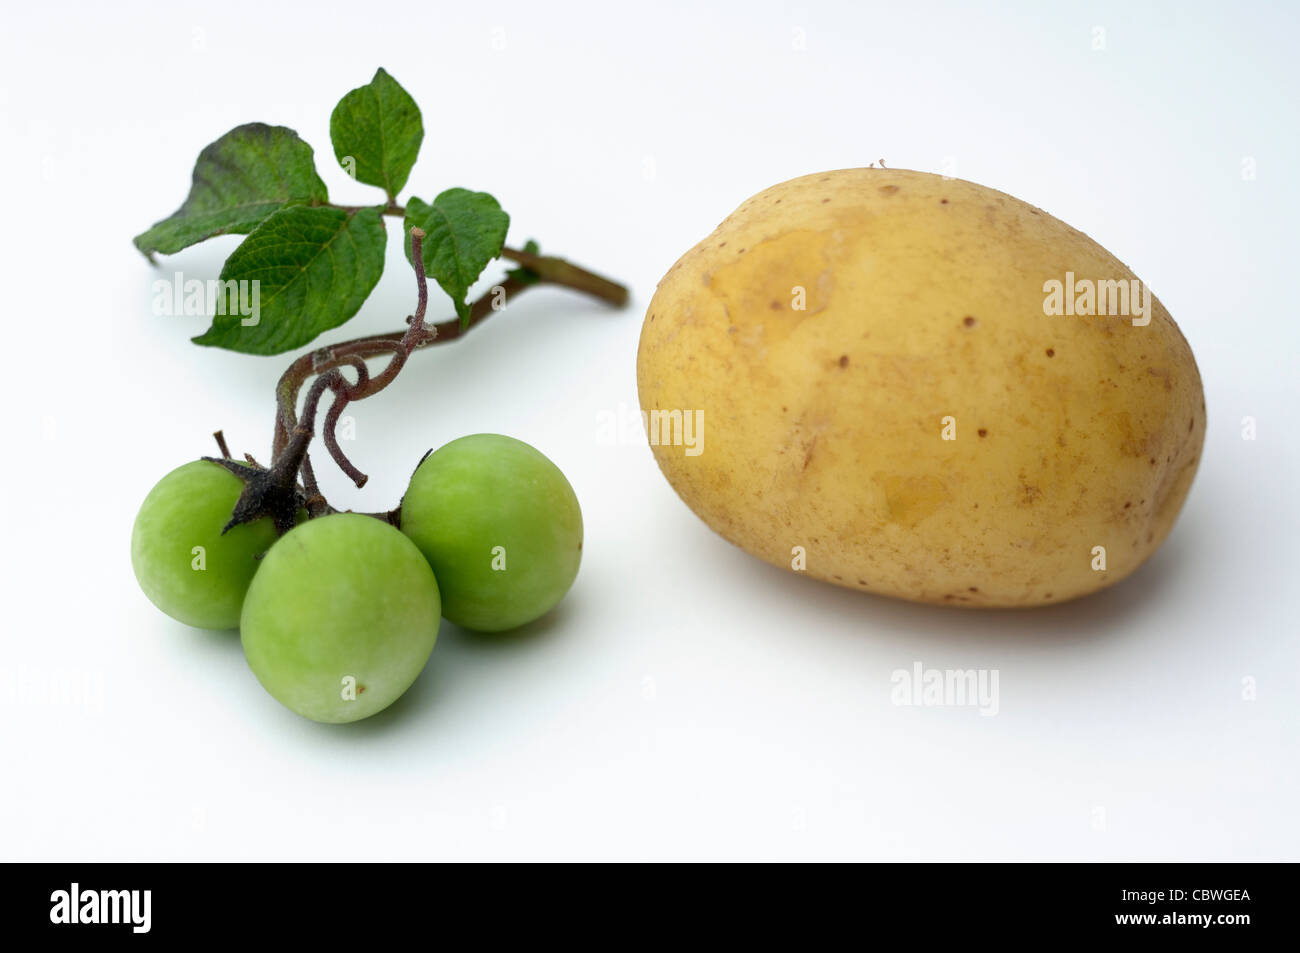 Potato (Solanum tuberosum). Twig with small green fruit and edible tuber. Studio picture against a white background Stock Photo